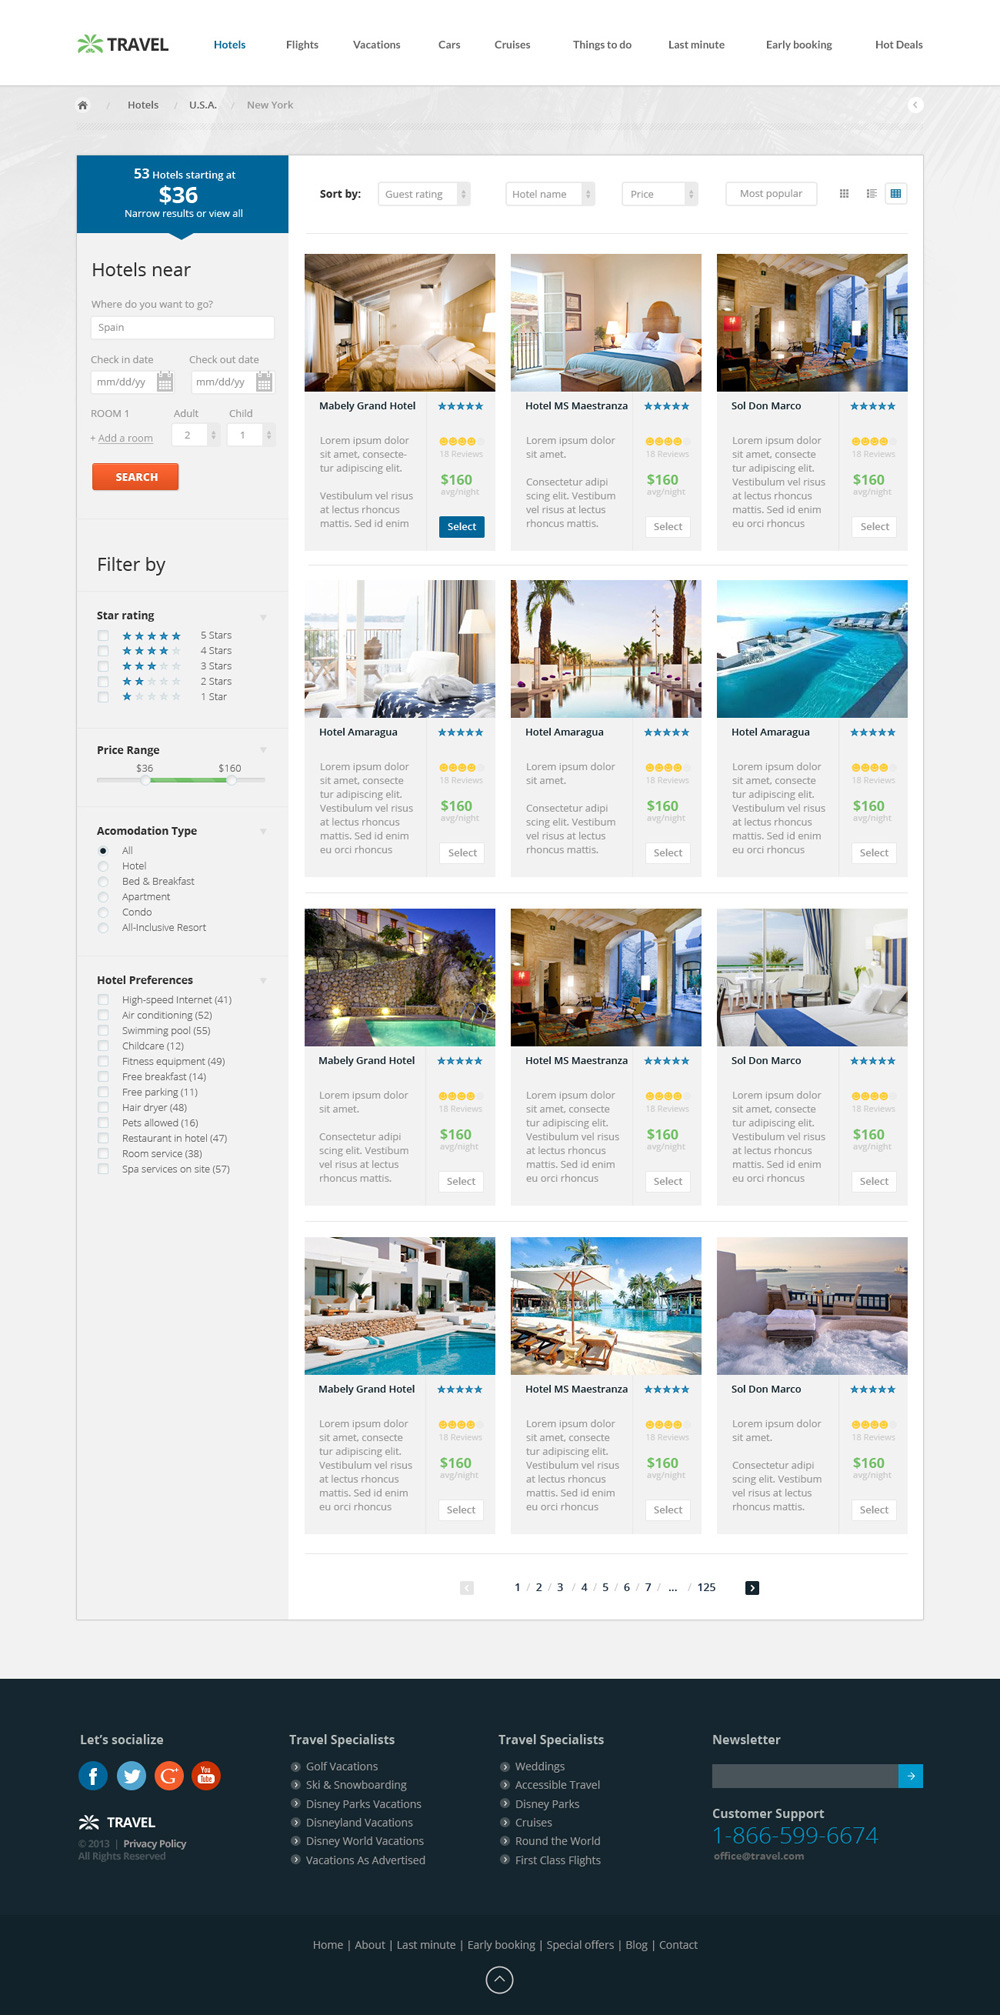 Booking Cruises Deals early booking Flights hotels last minute psd template rates real estate Rent a Car room things to do travel agency